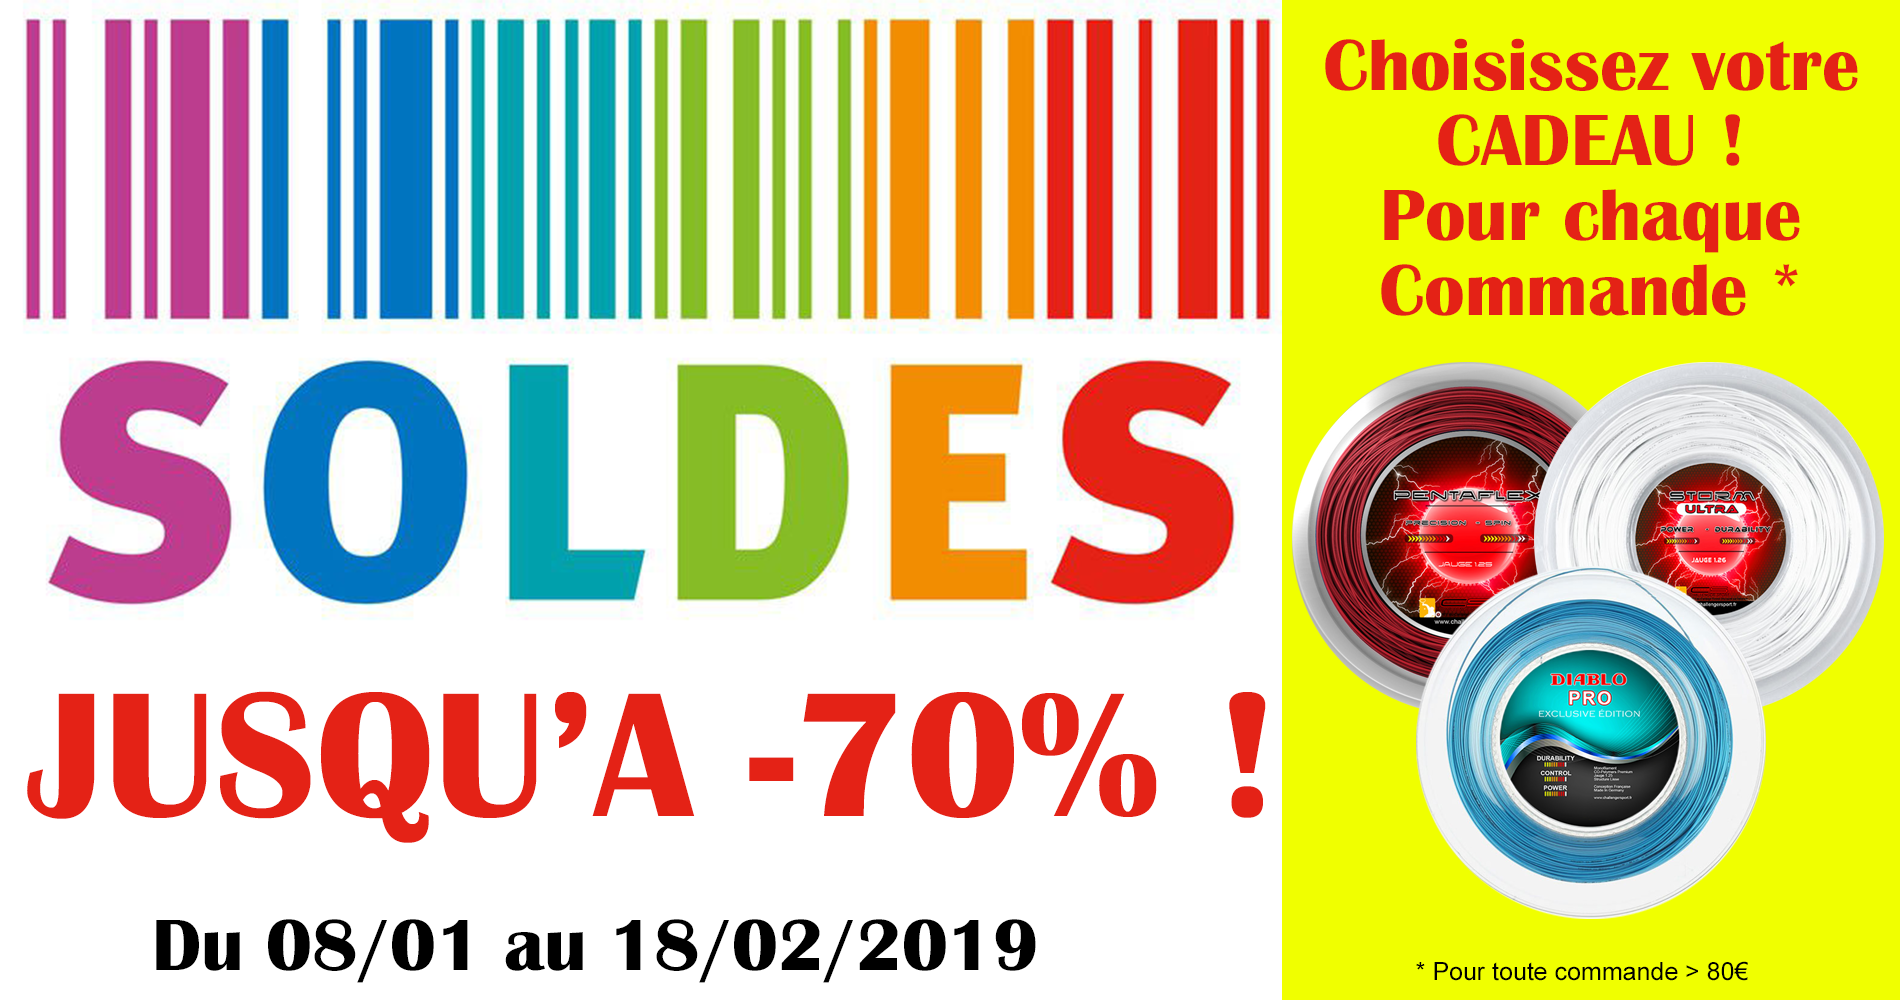 bandeau_soldes_accueuil_1920x.png?v=1546